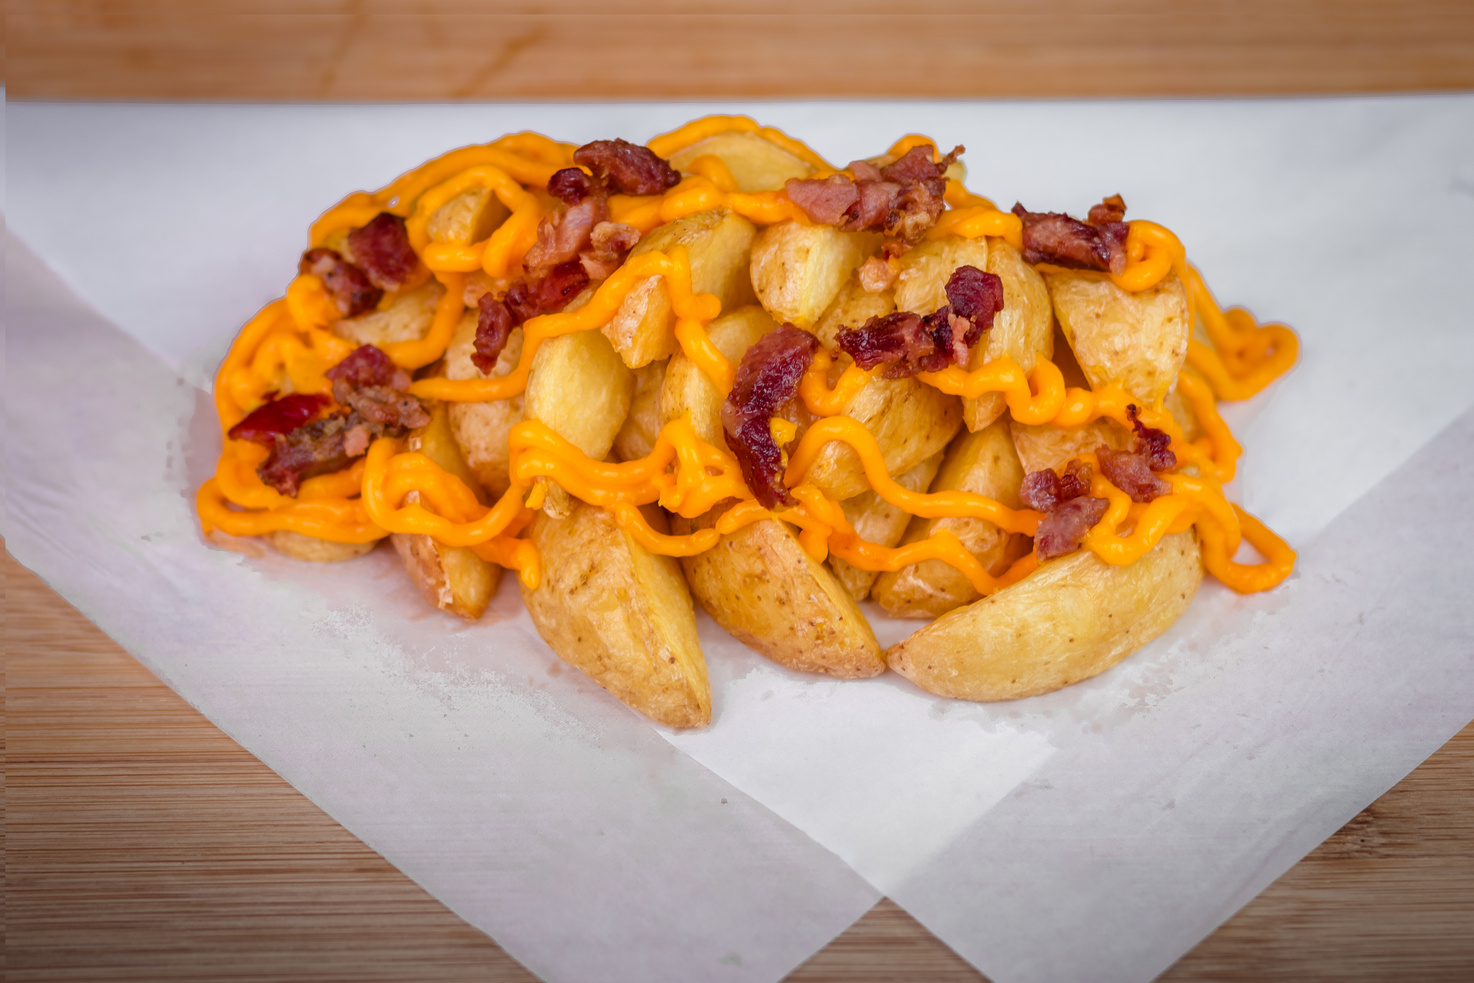 Fries with bacon and cheddar